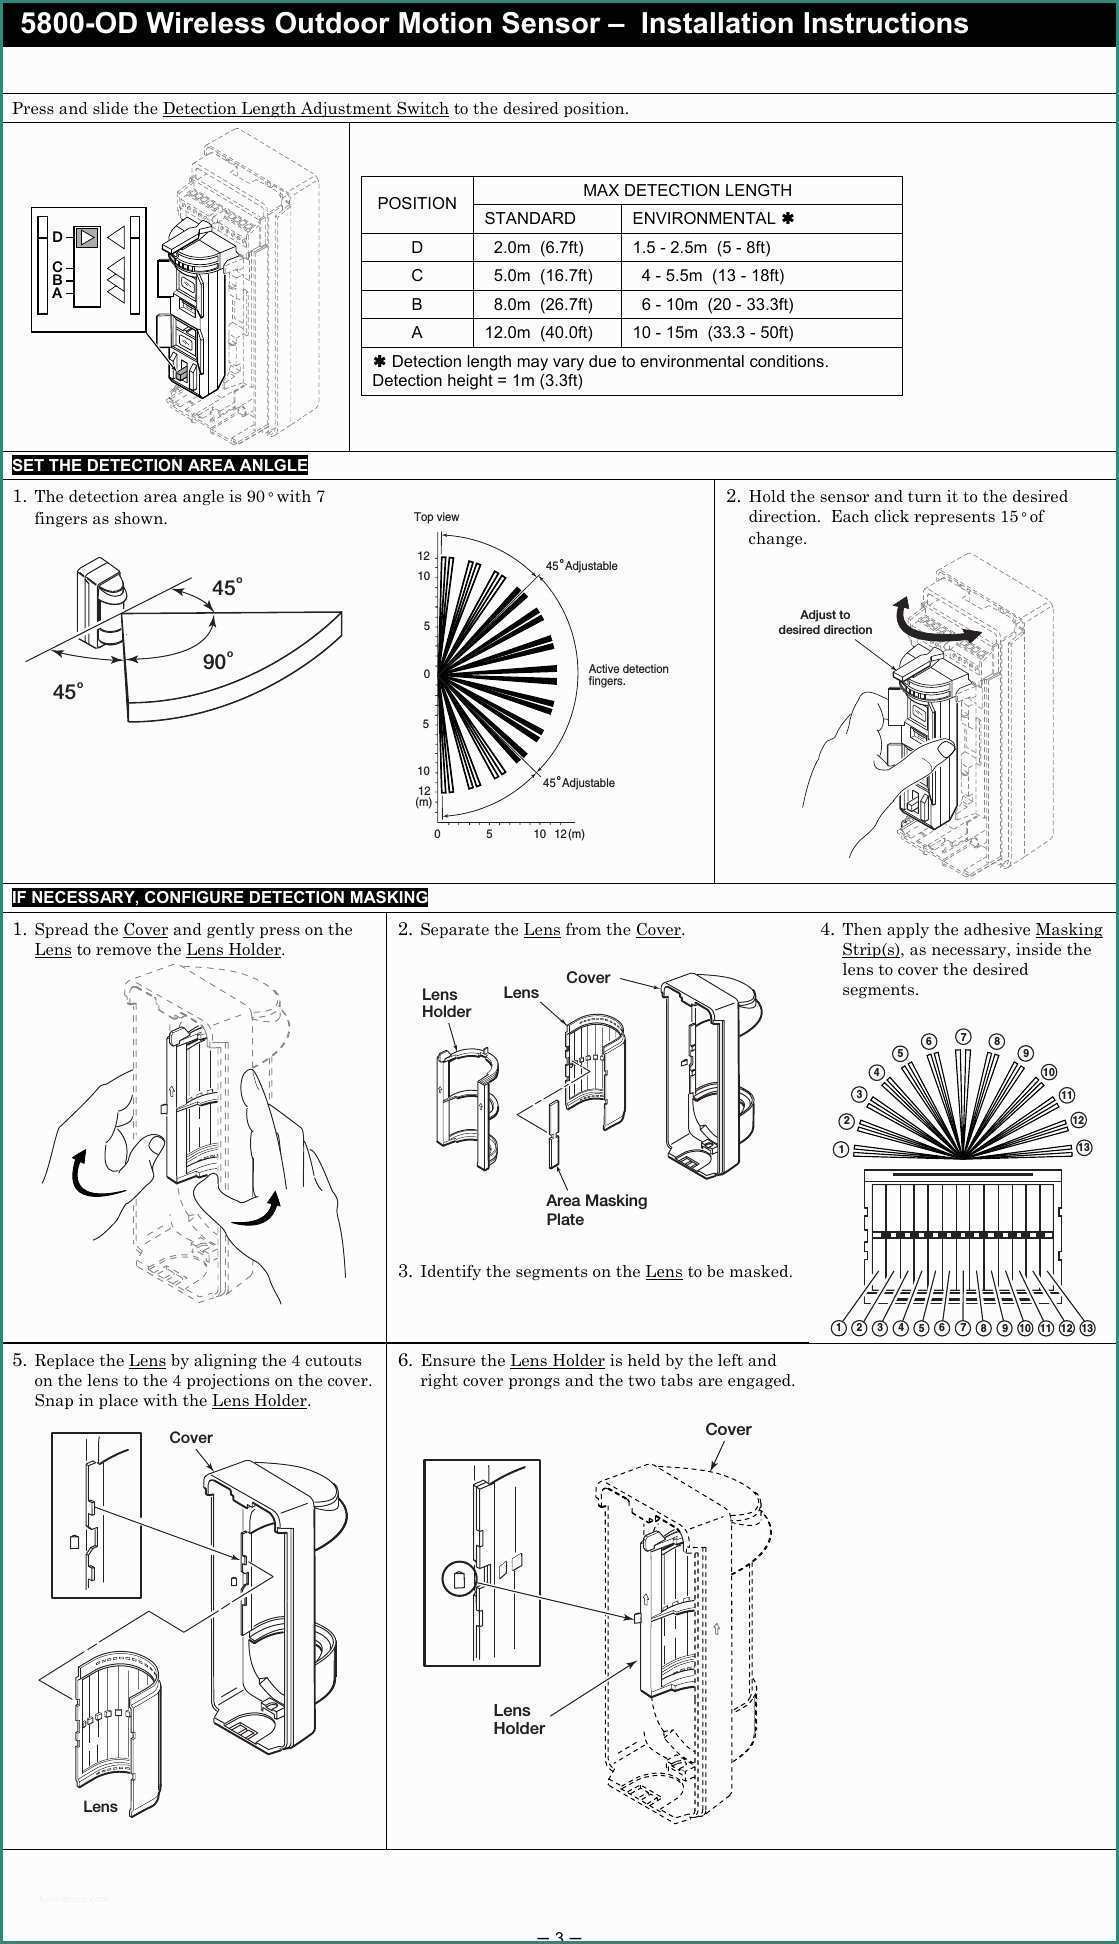 Vaillant Ecoblock Plus Manuale E Wiring Diagram Performance System Volvo C30 Archives Page 3 Of 4